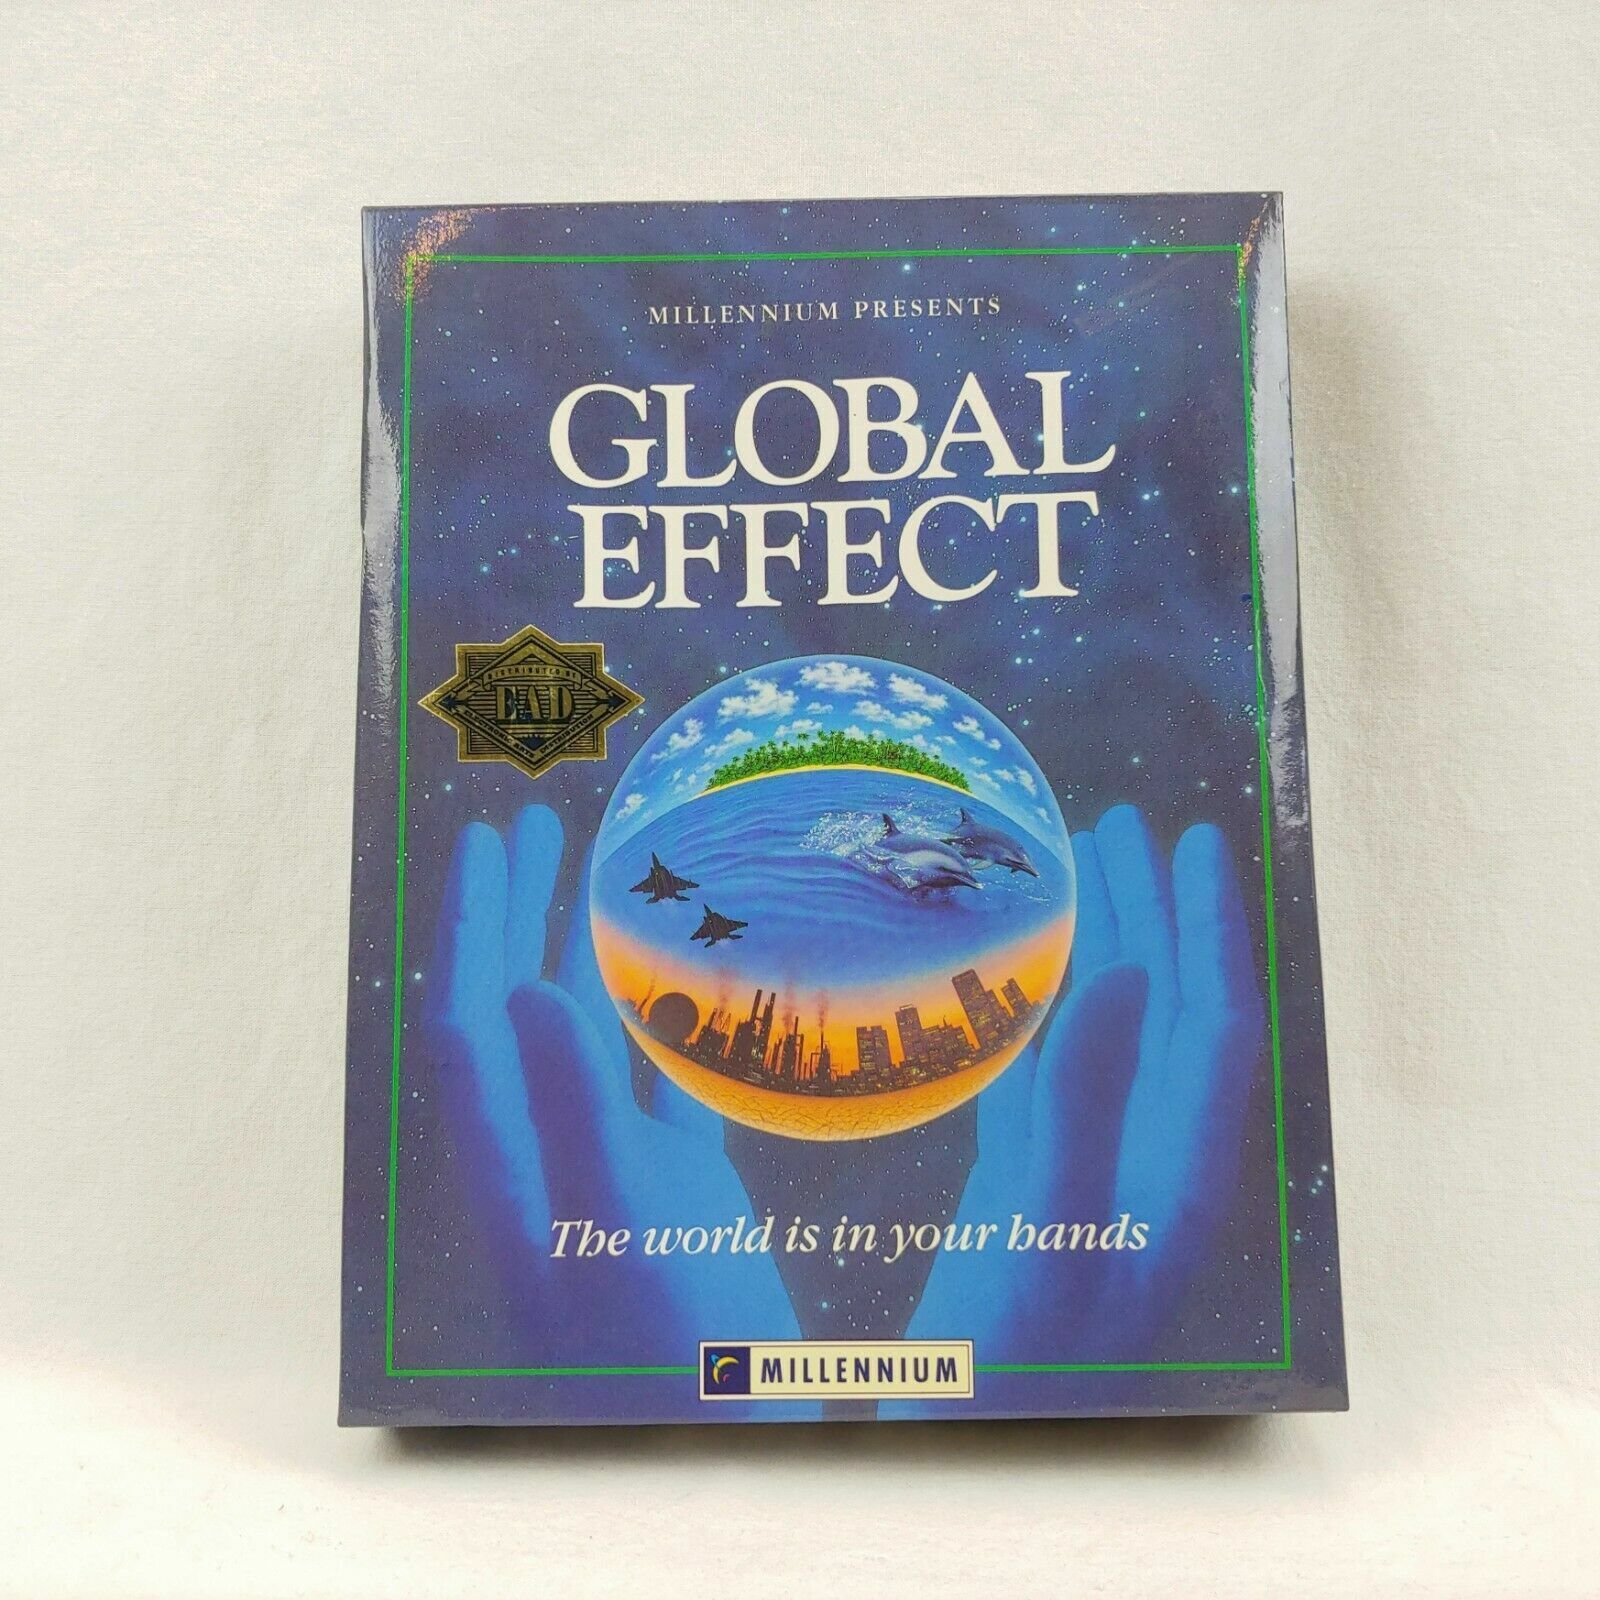 Commodore Amiga GLOBAL EFFECT Computer Game by Millennium